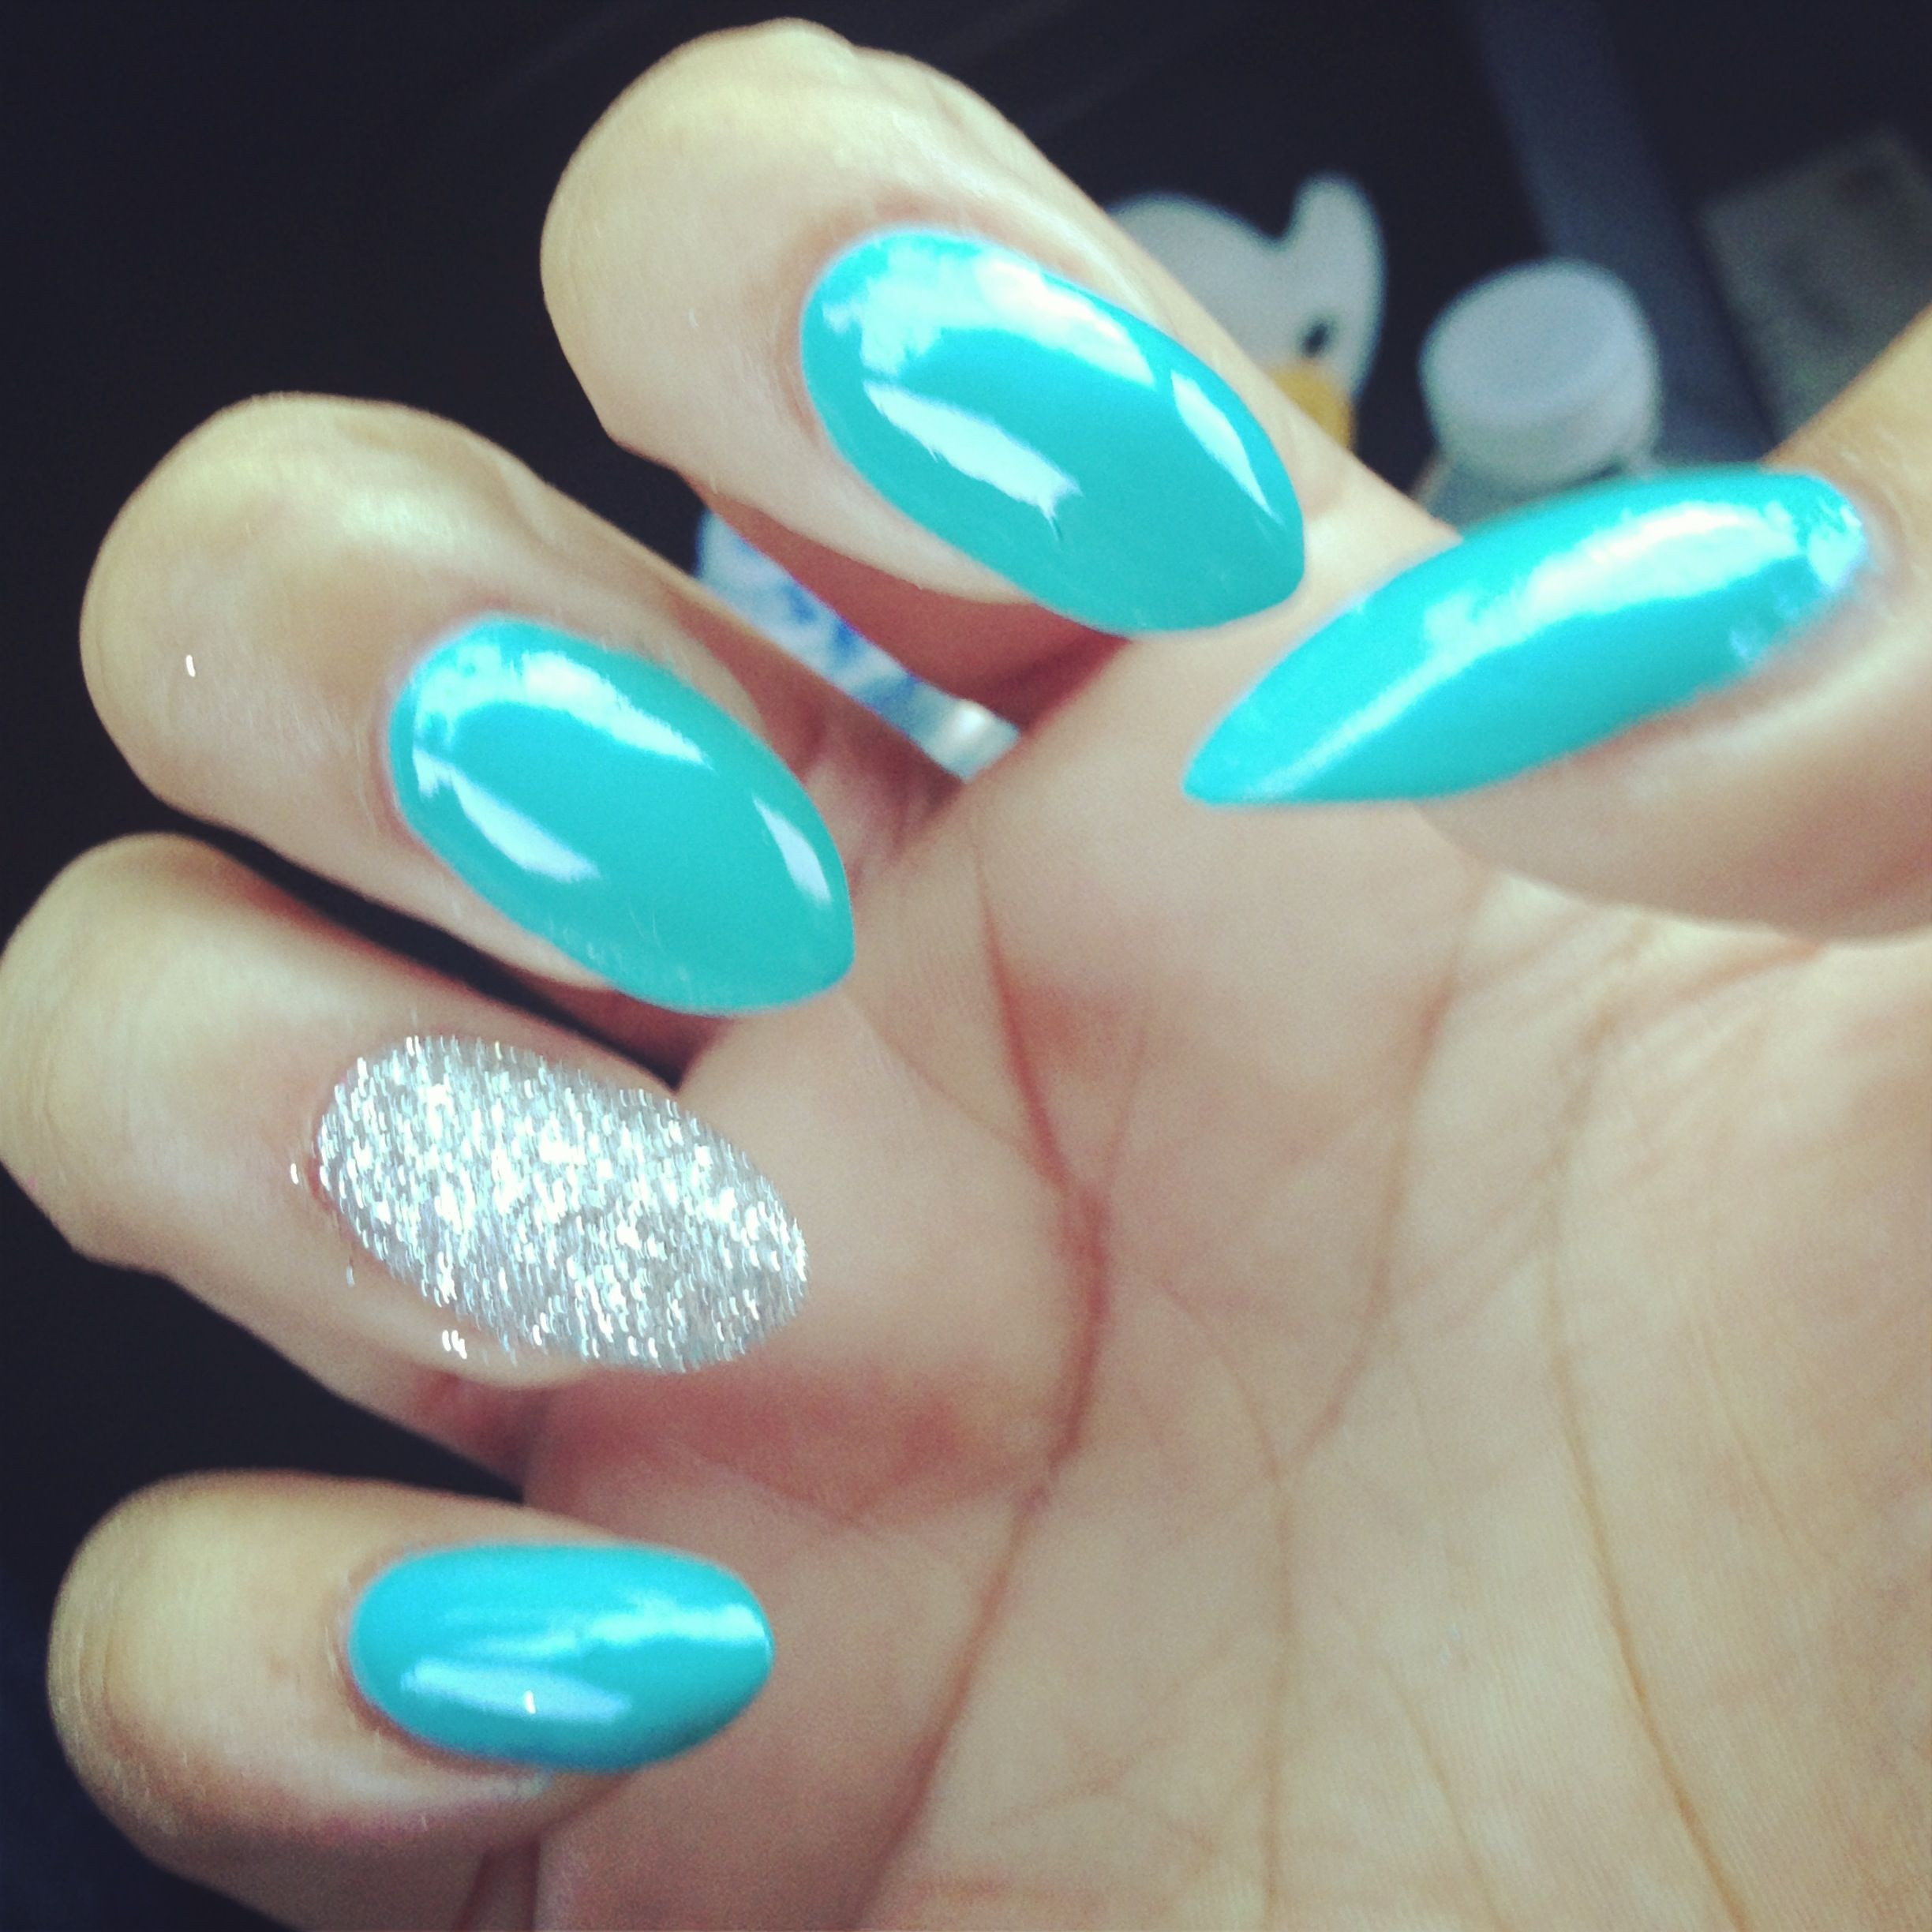 Turquoise Glitter Nails
 Turquoise and accent glitter almond nails